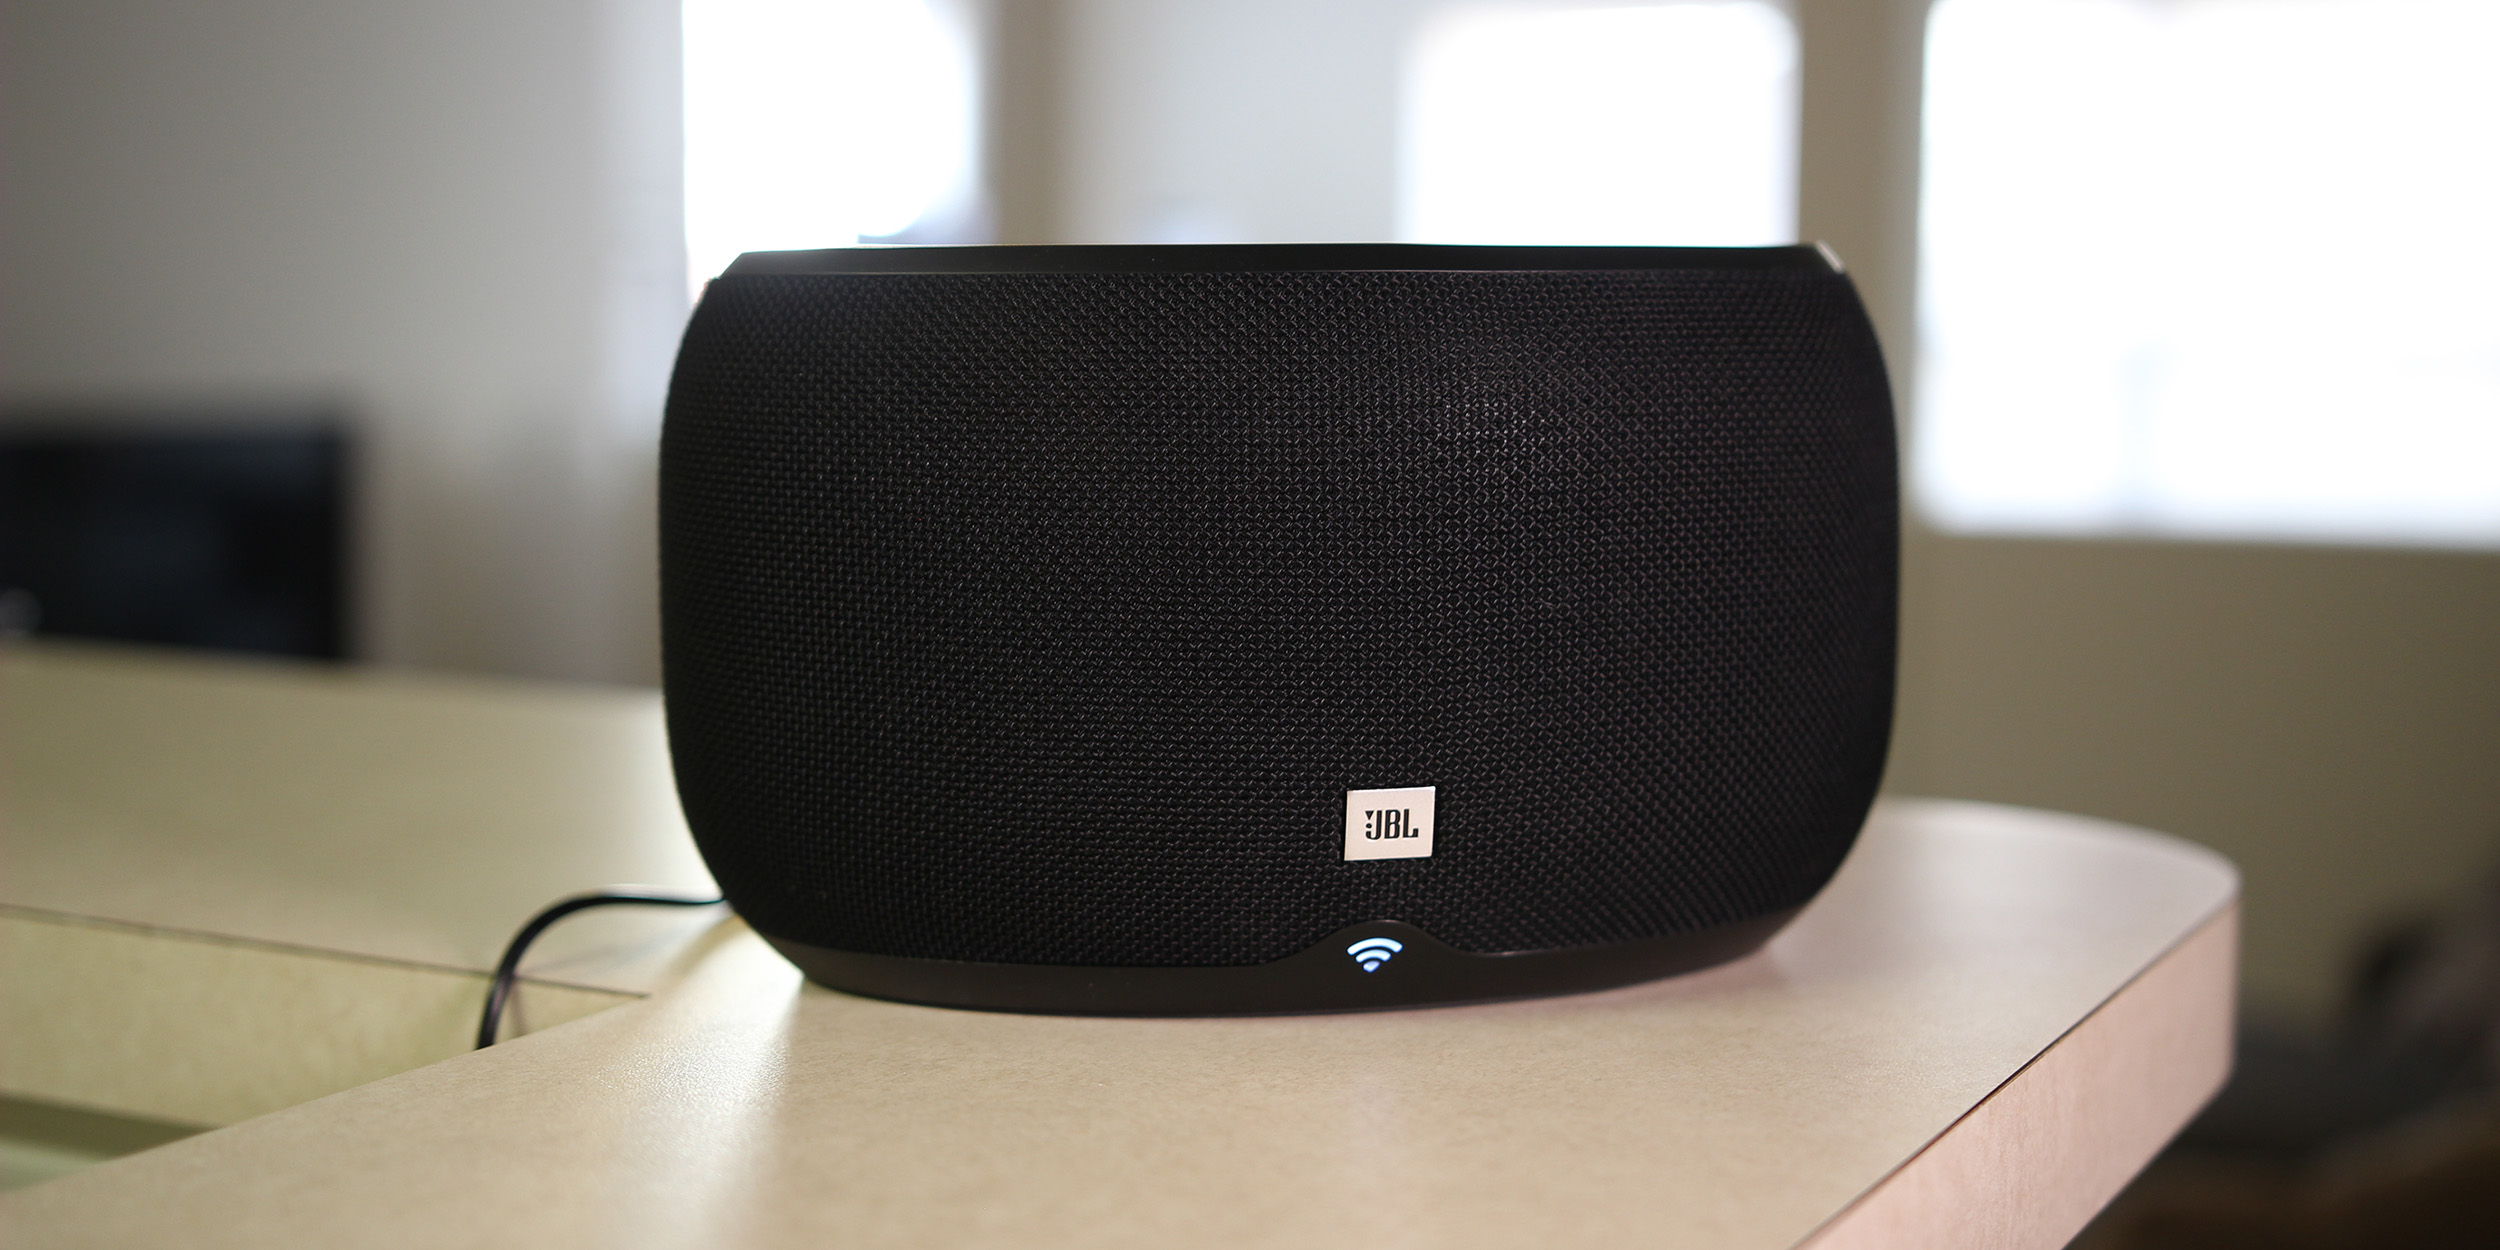 Review: The JBL Link 300 is the Google Home Max you can actually